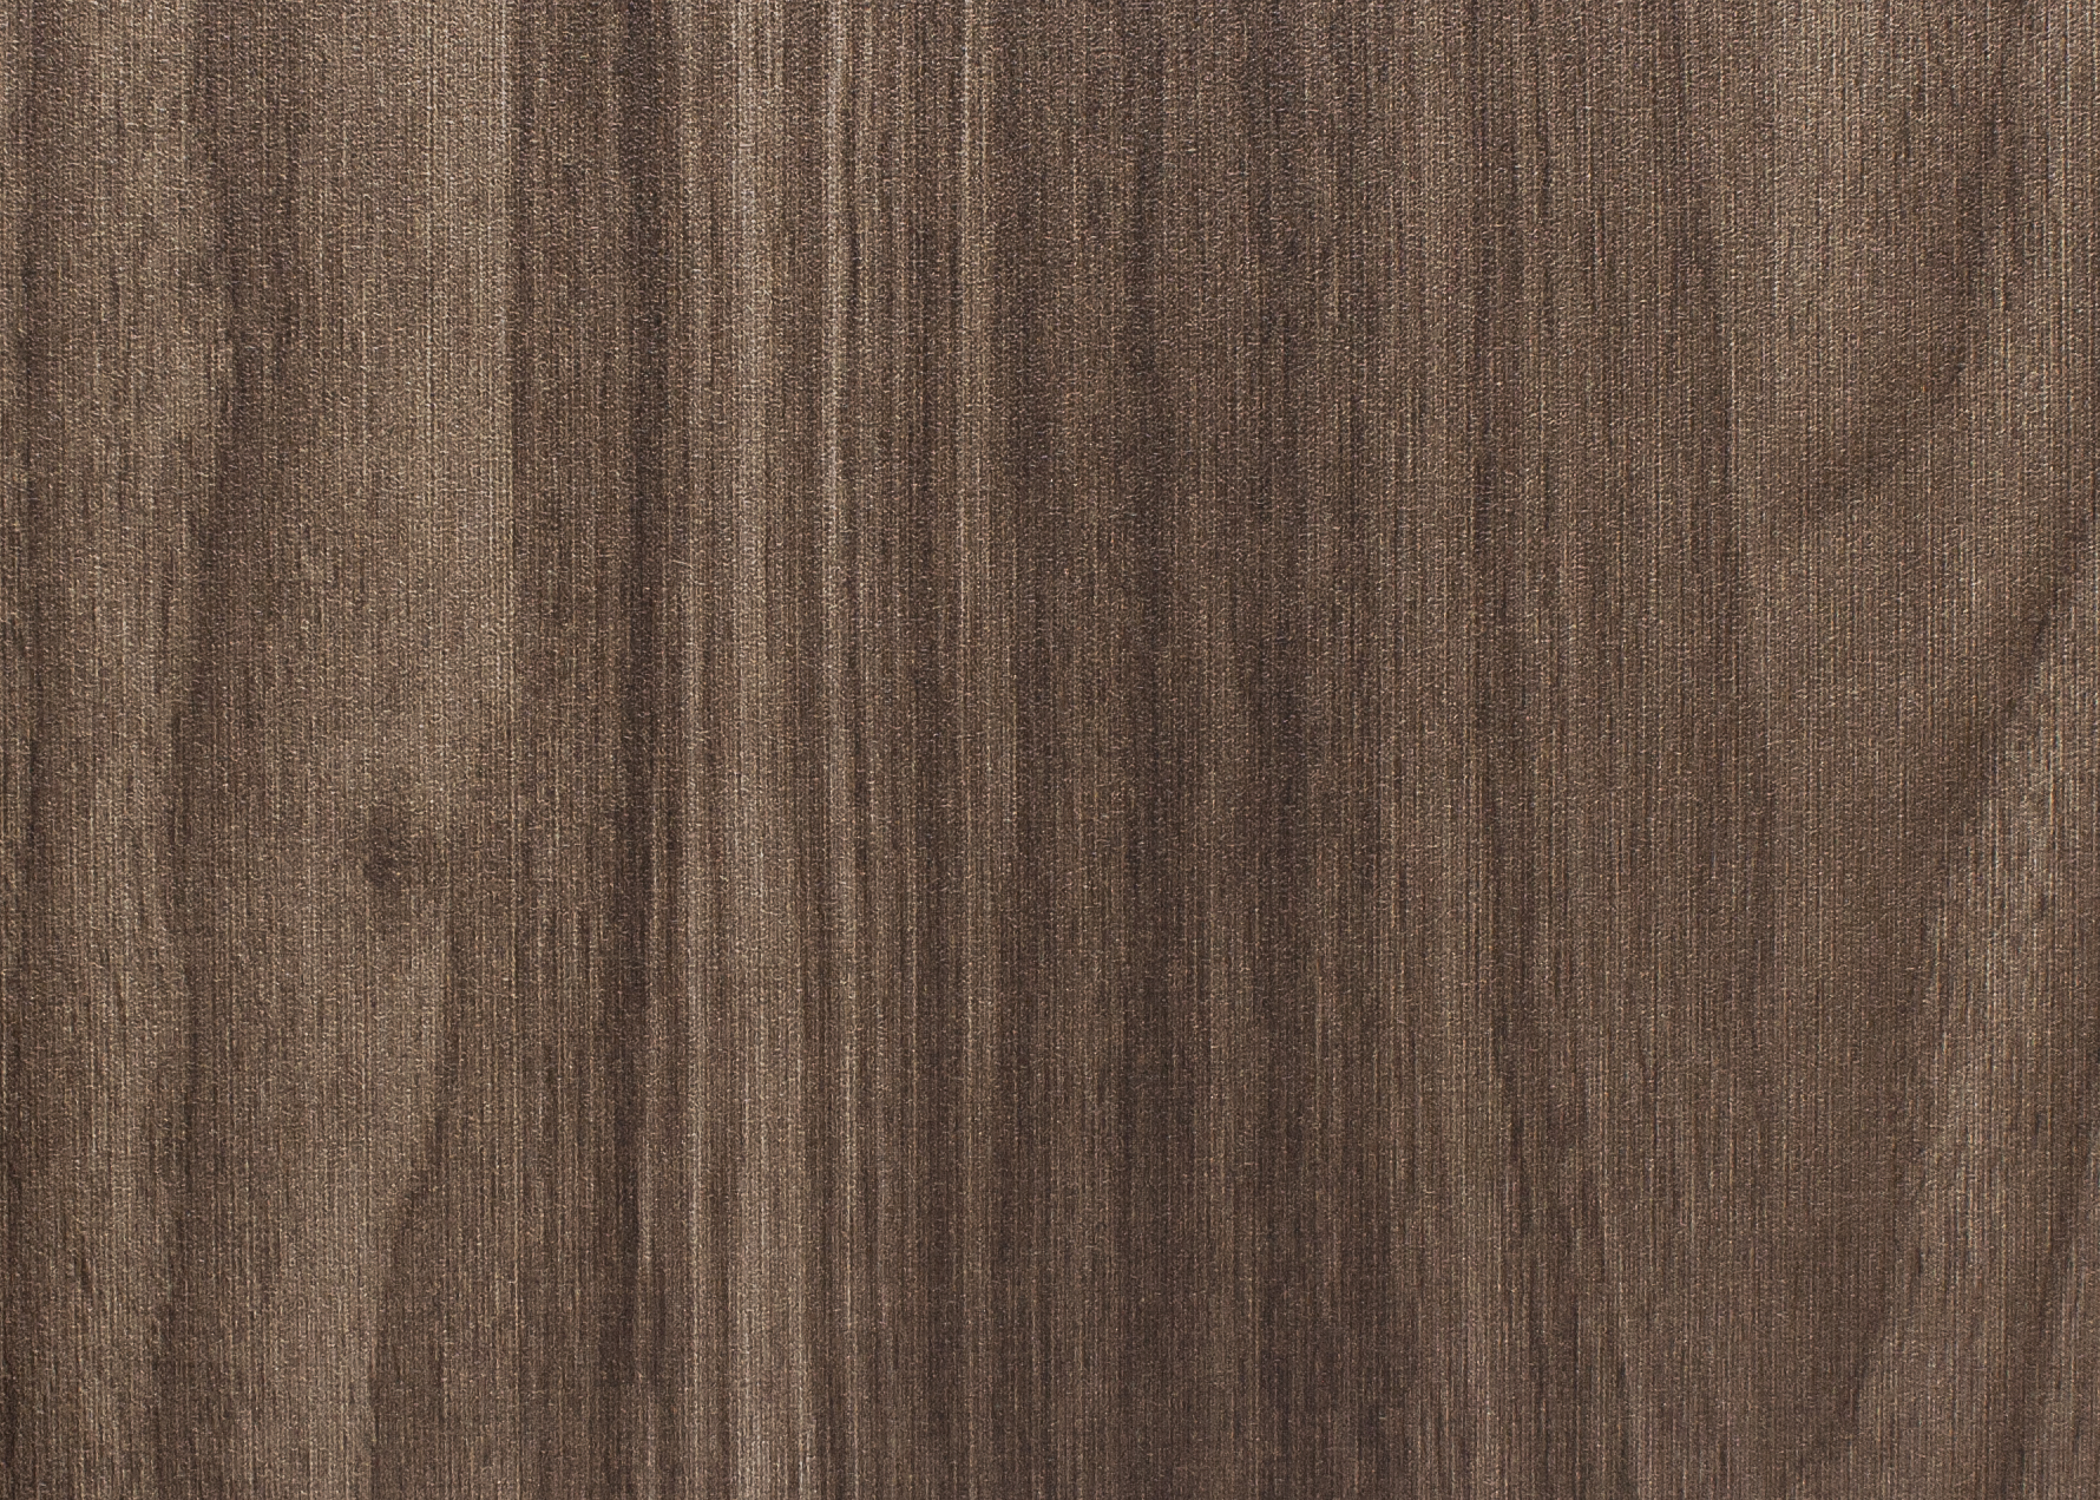 Roysons Wallcoverings Grove_8254_Mesquite